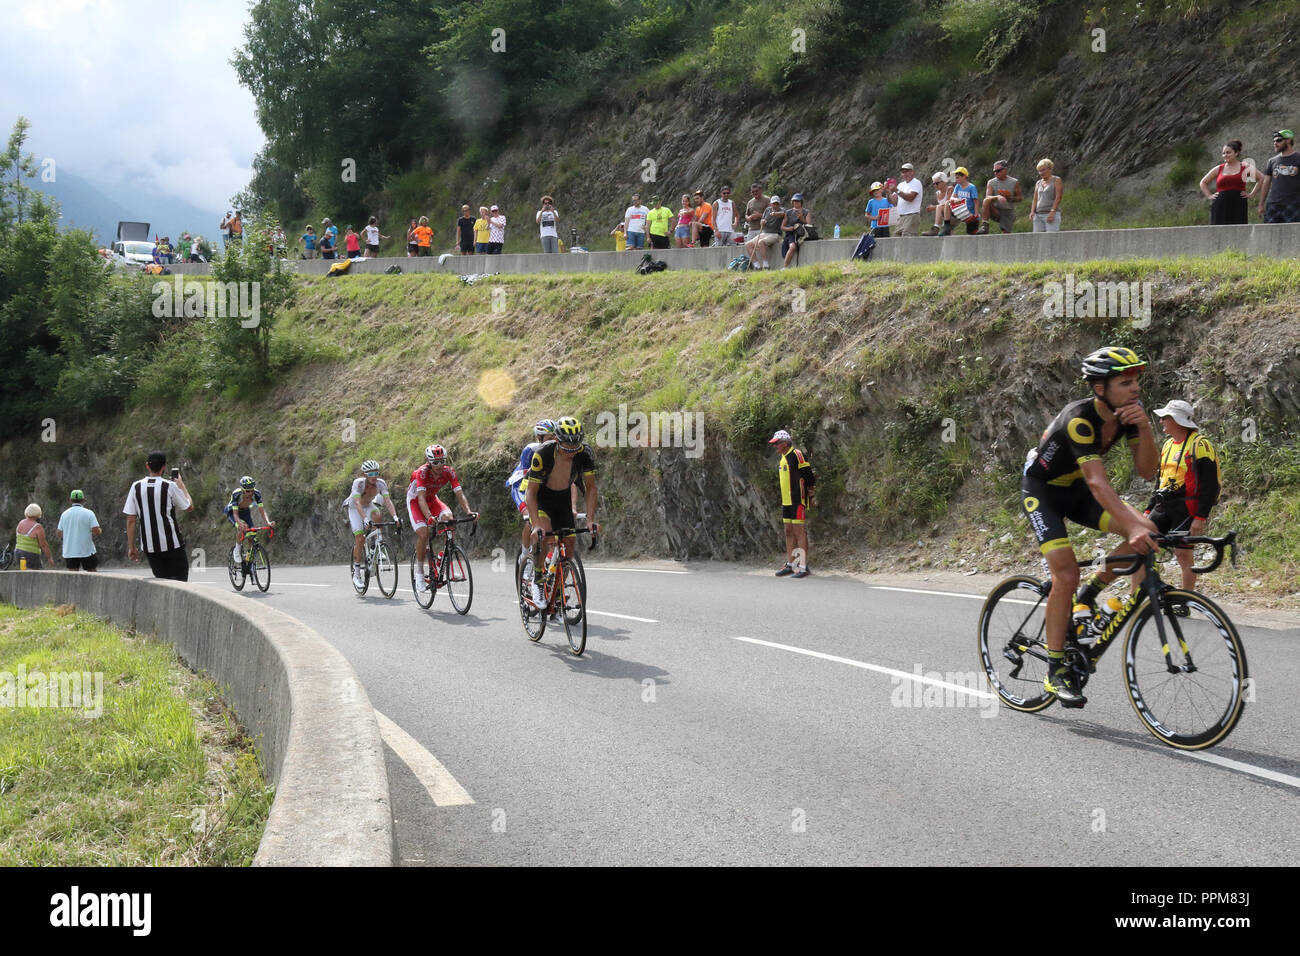 Lilian Calmejane and other cyclists climbing during the 2018 Tour de France 17th stage in Soulan,  French Pyrenees, and supporters on the roadside. Stock Photo